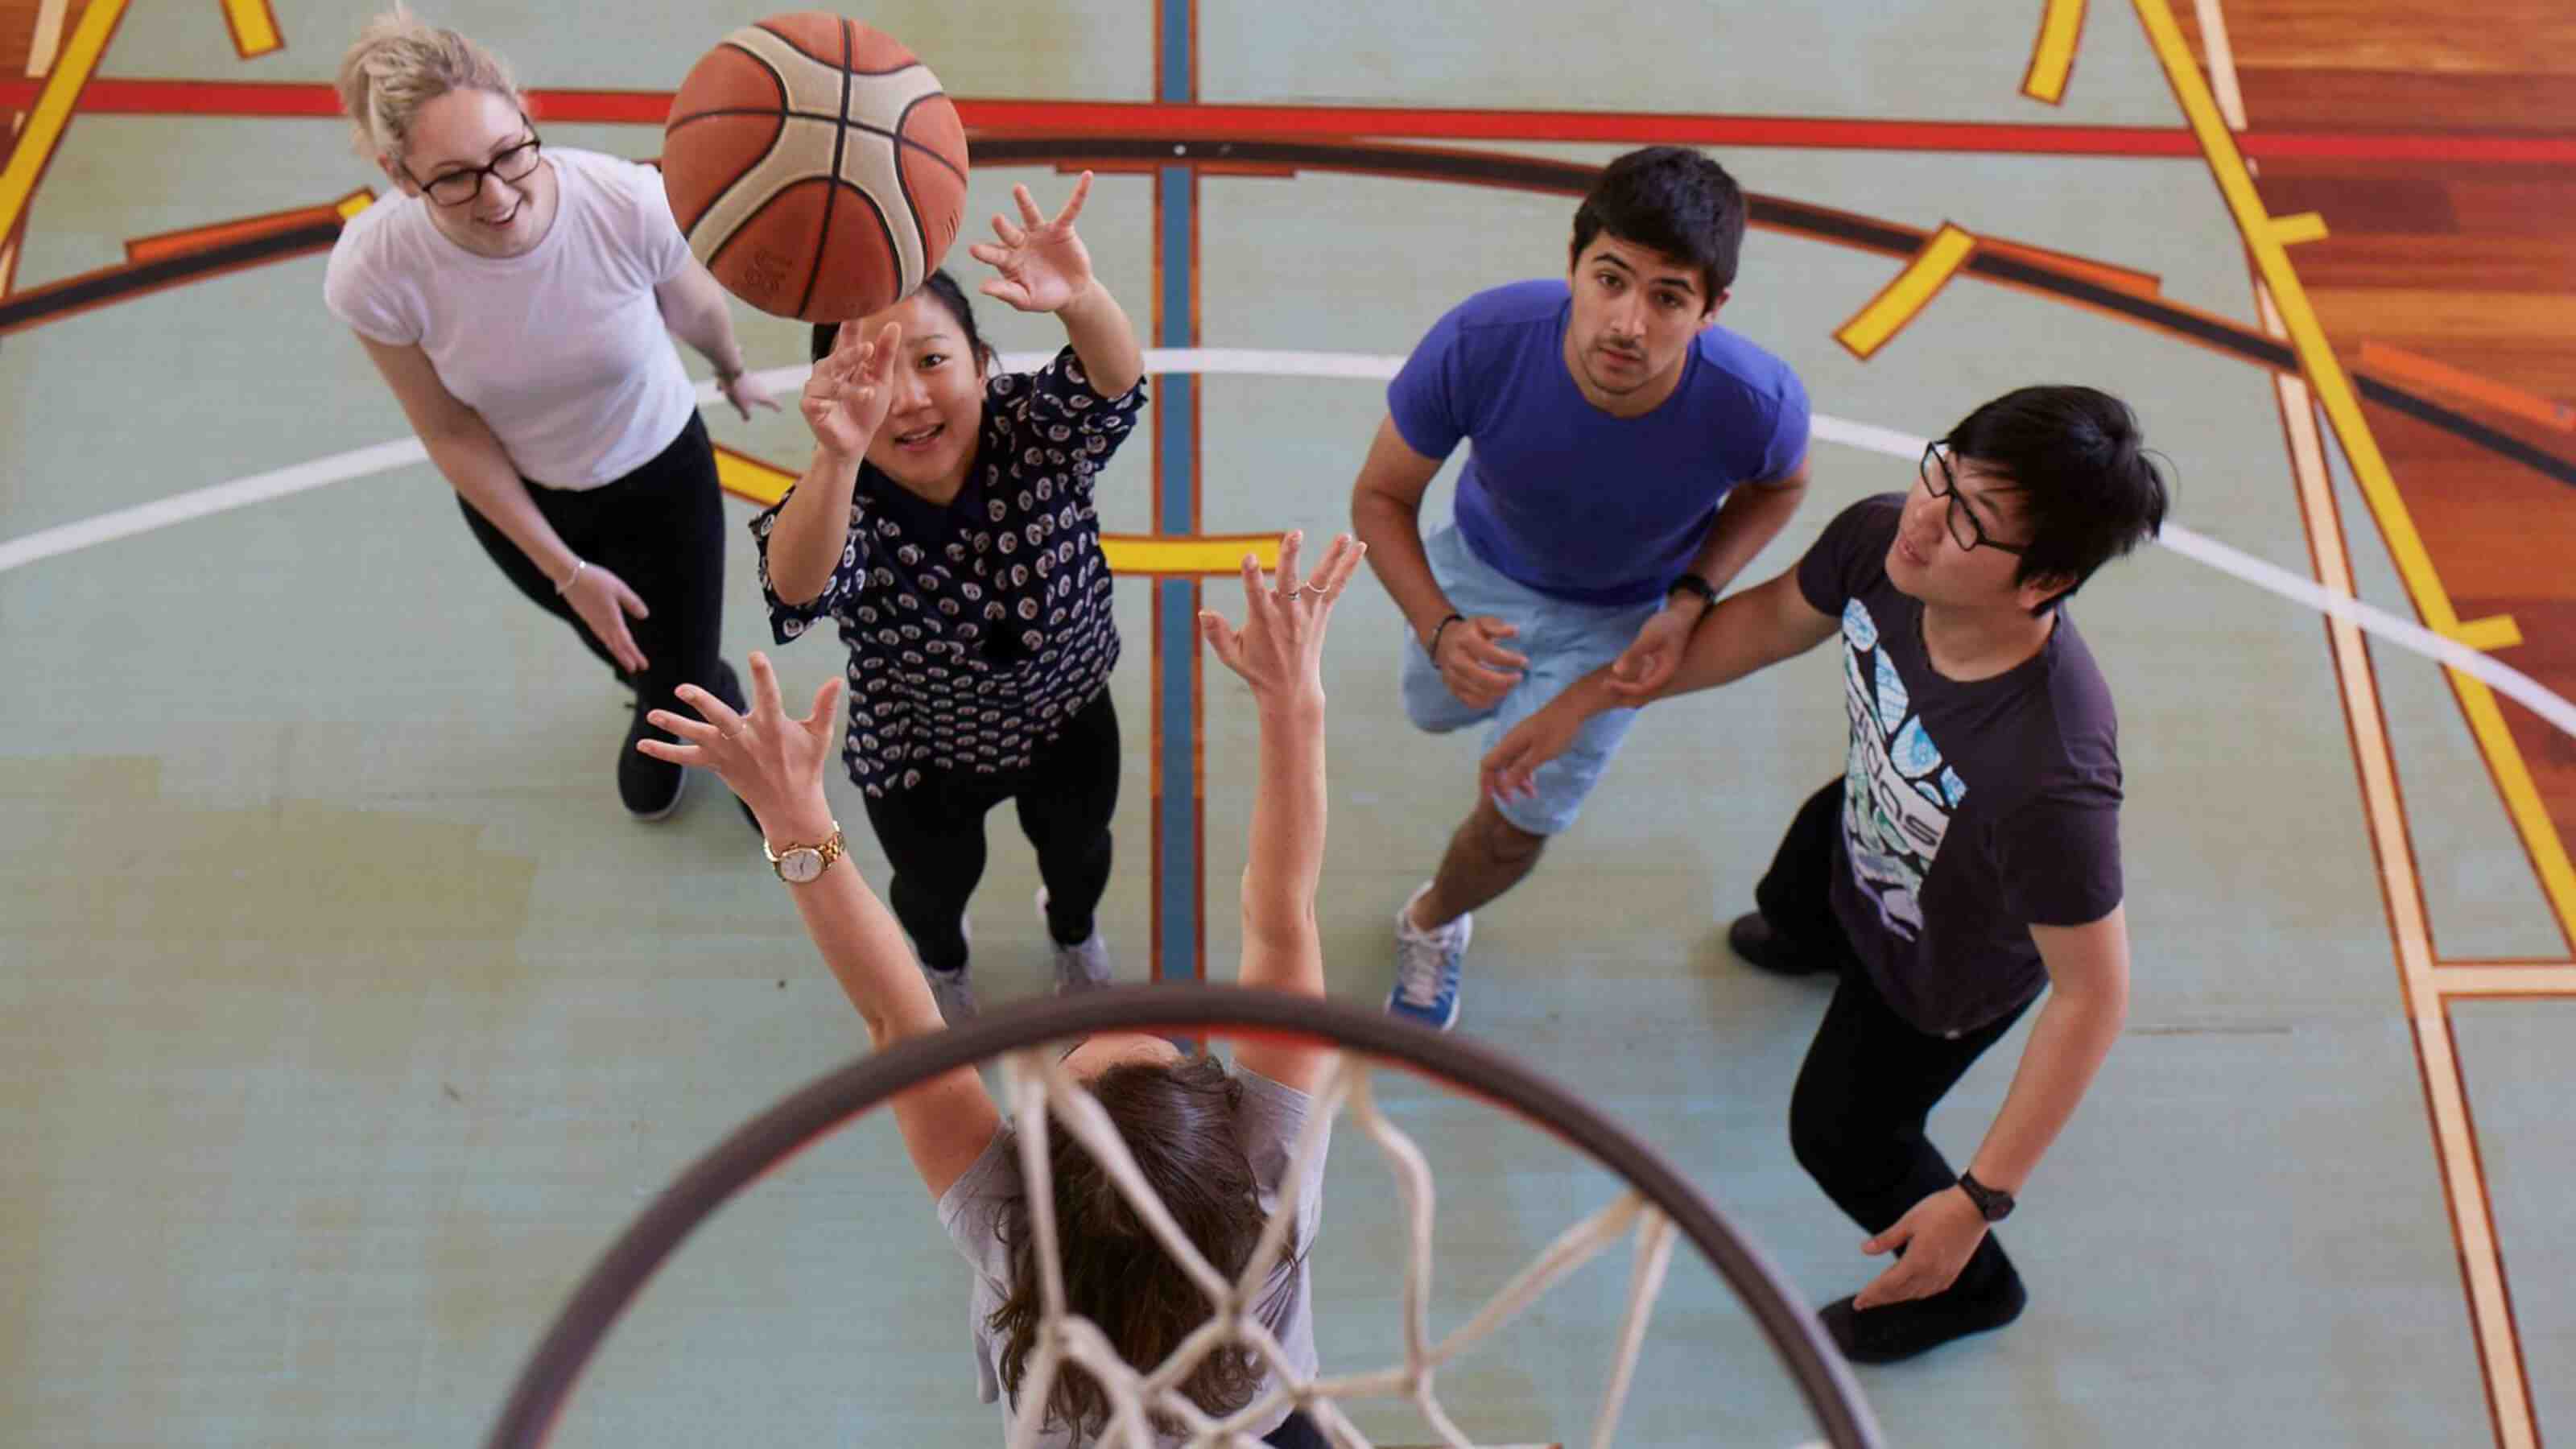 Students playing basketball at Victoria's Kelburn Recreation Centre